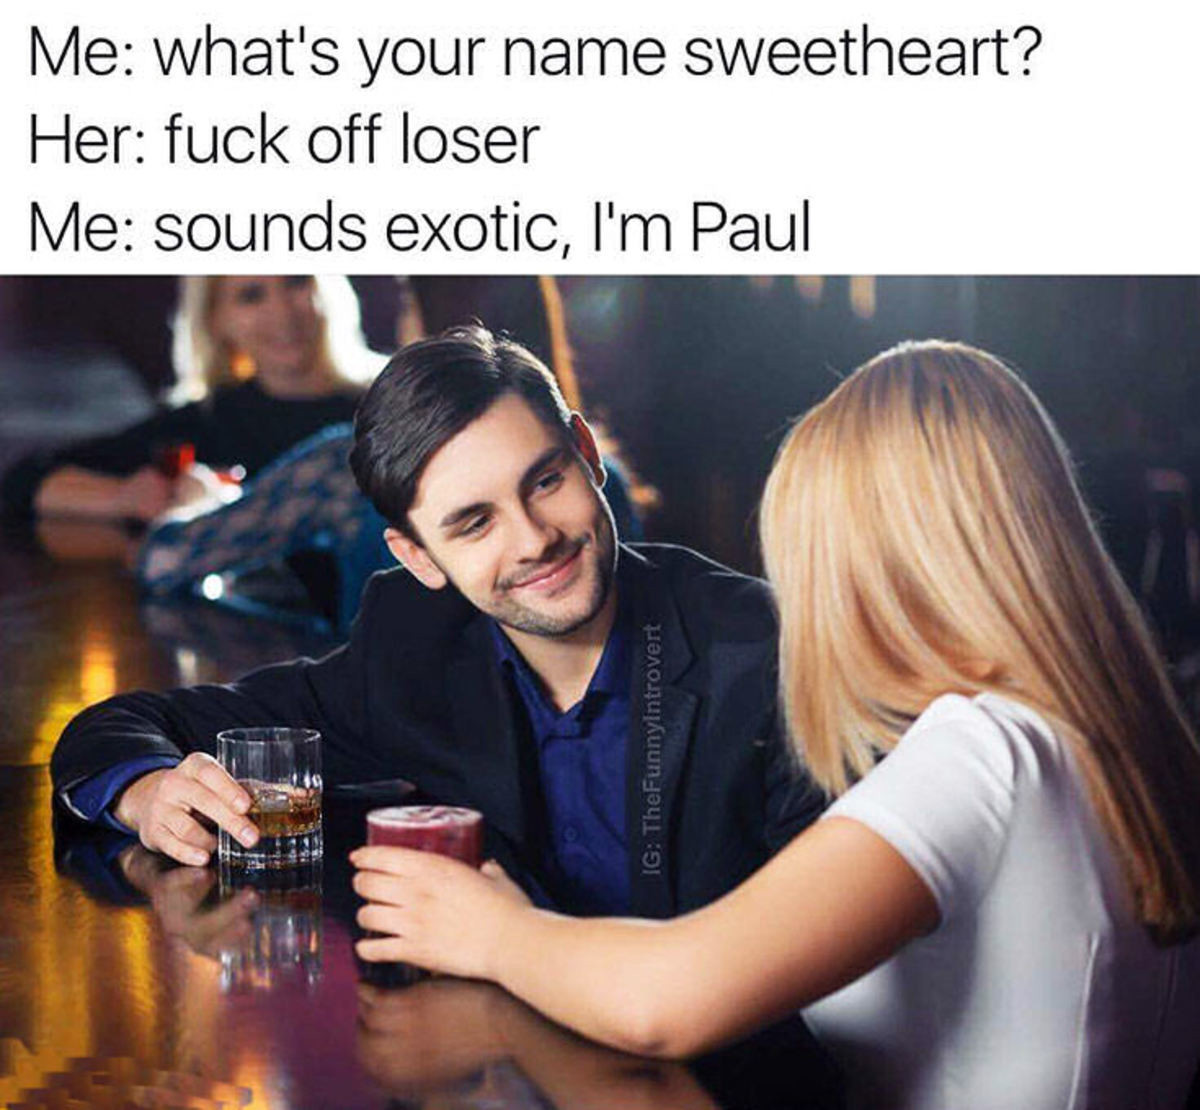 Post your best pick up line in the comments - meme